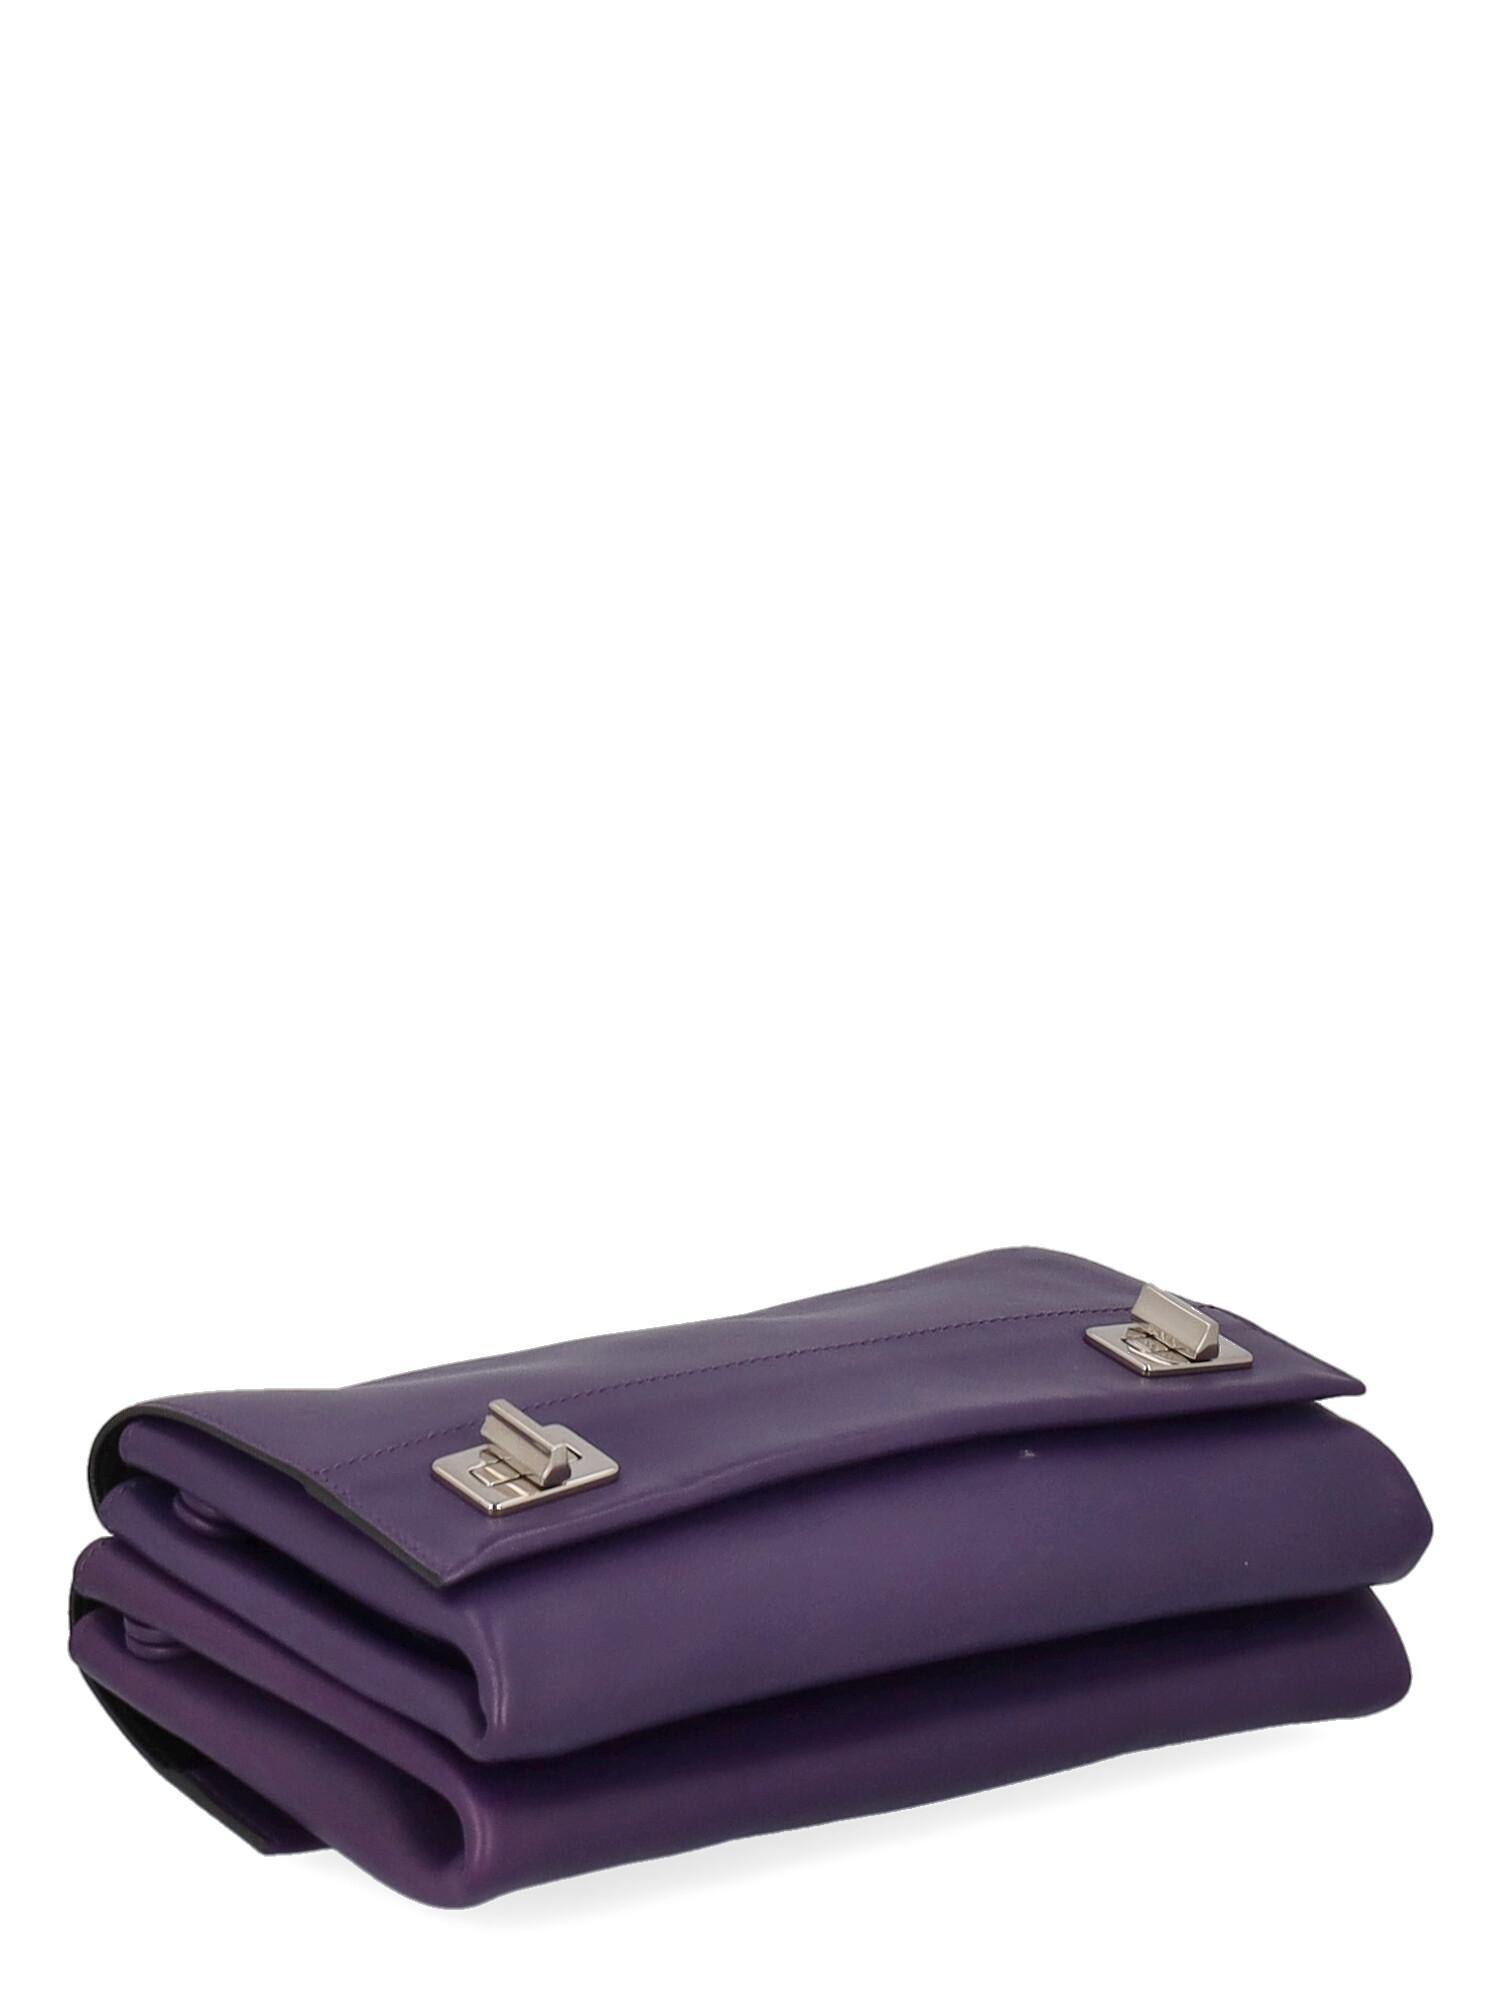 Prada  Women   Shoulder bags  Purple Leather  In Good Condition For Sale In Milan, IT